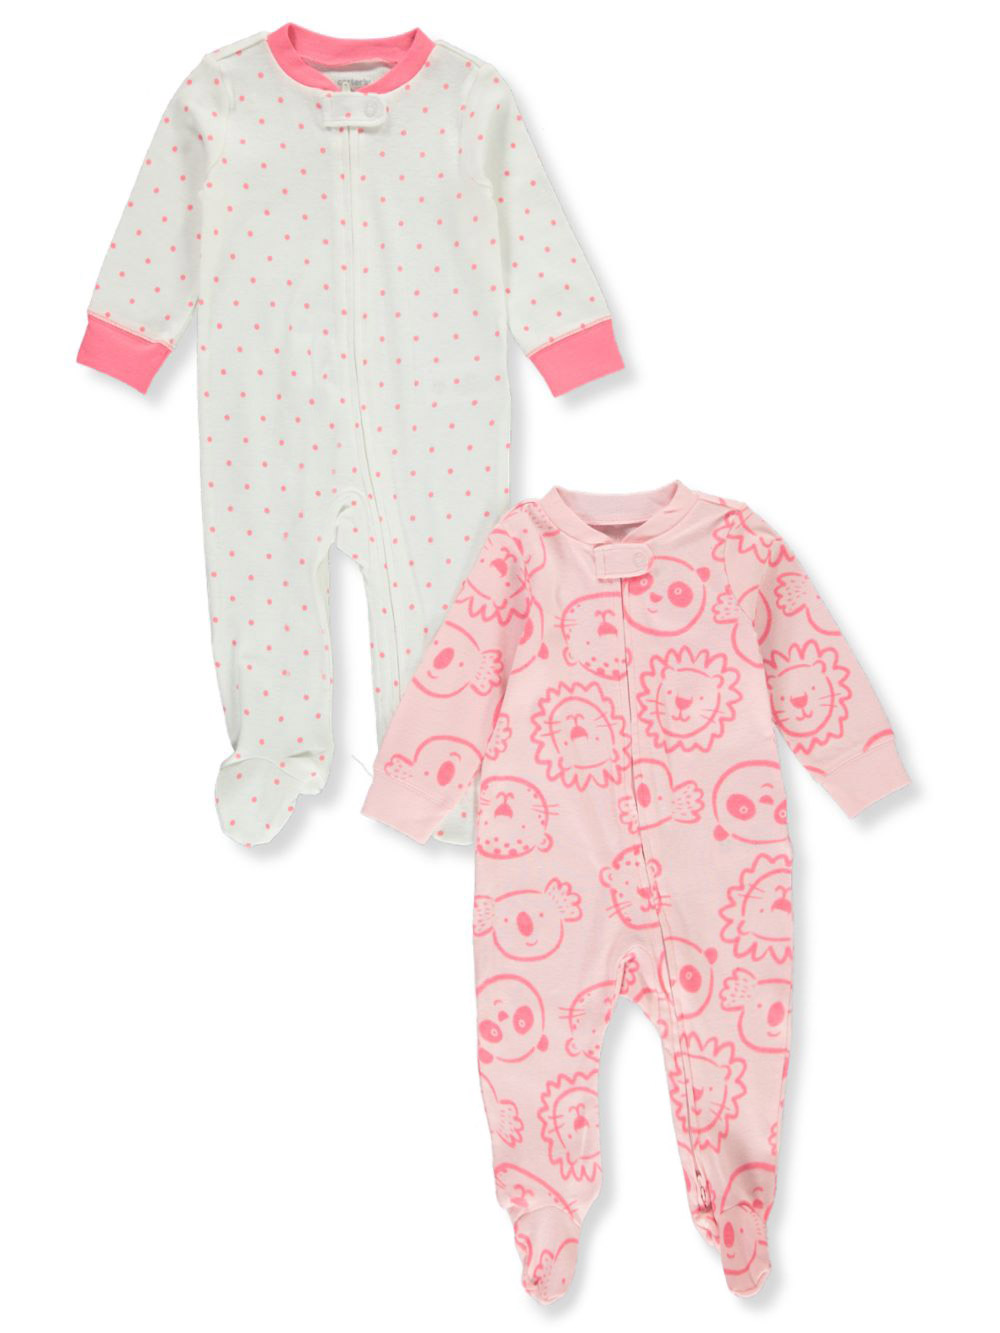 Girls Pink and White Coveralls